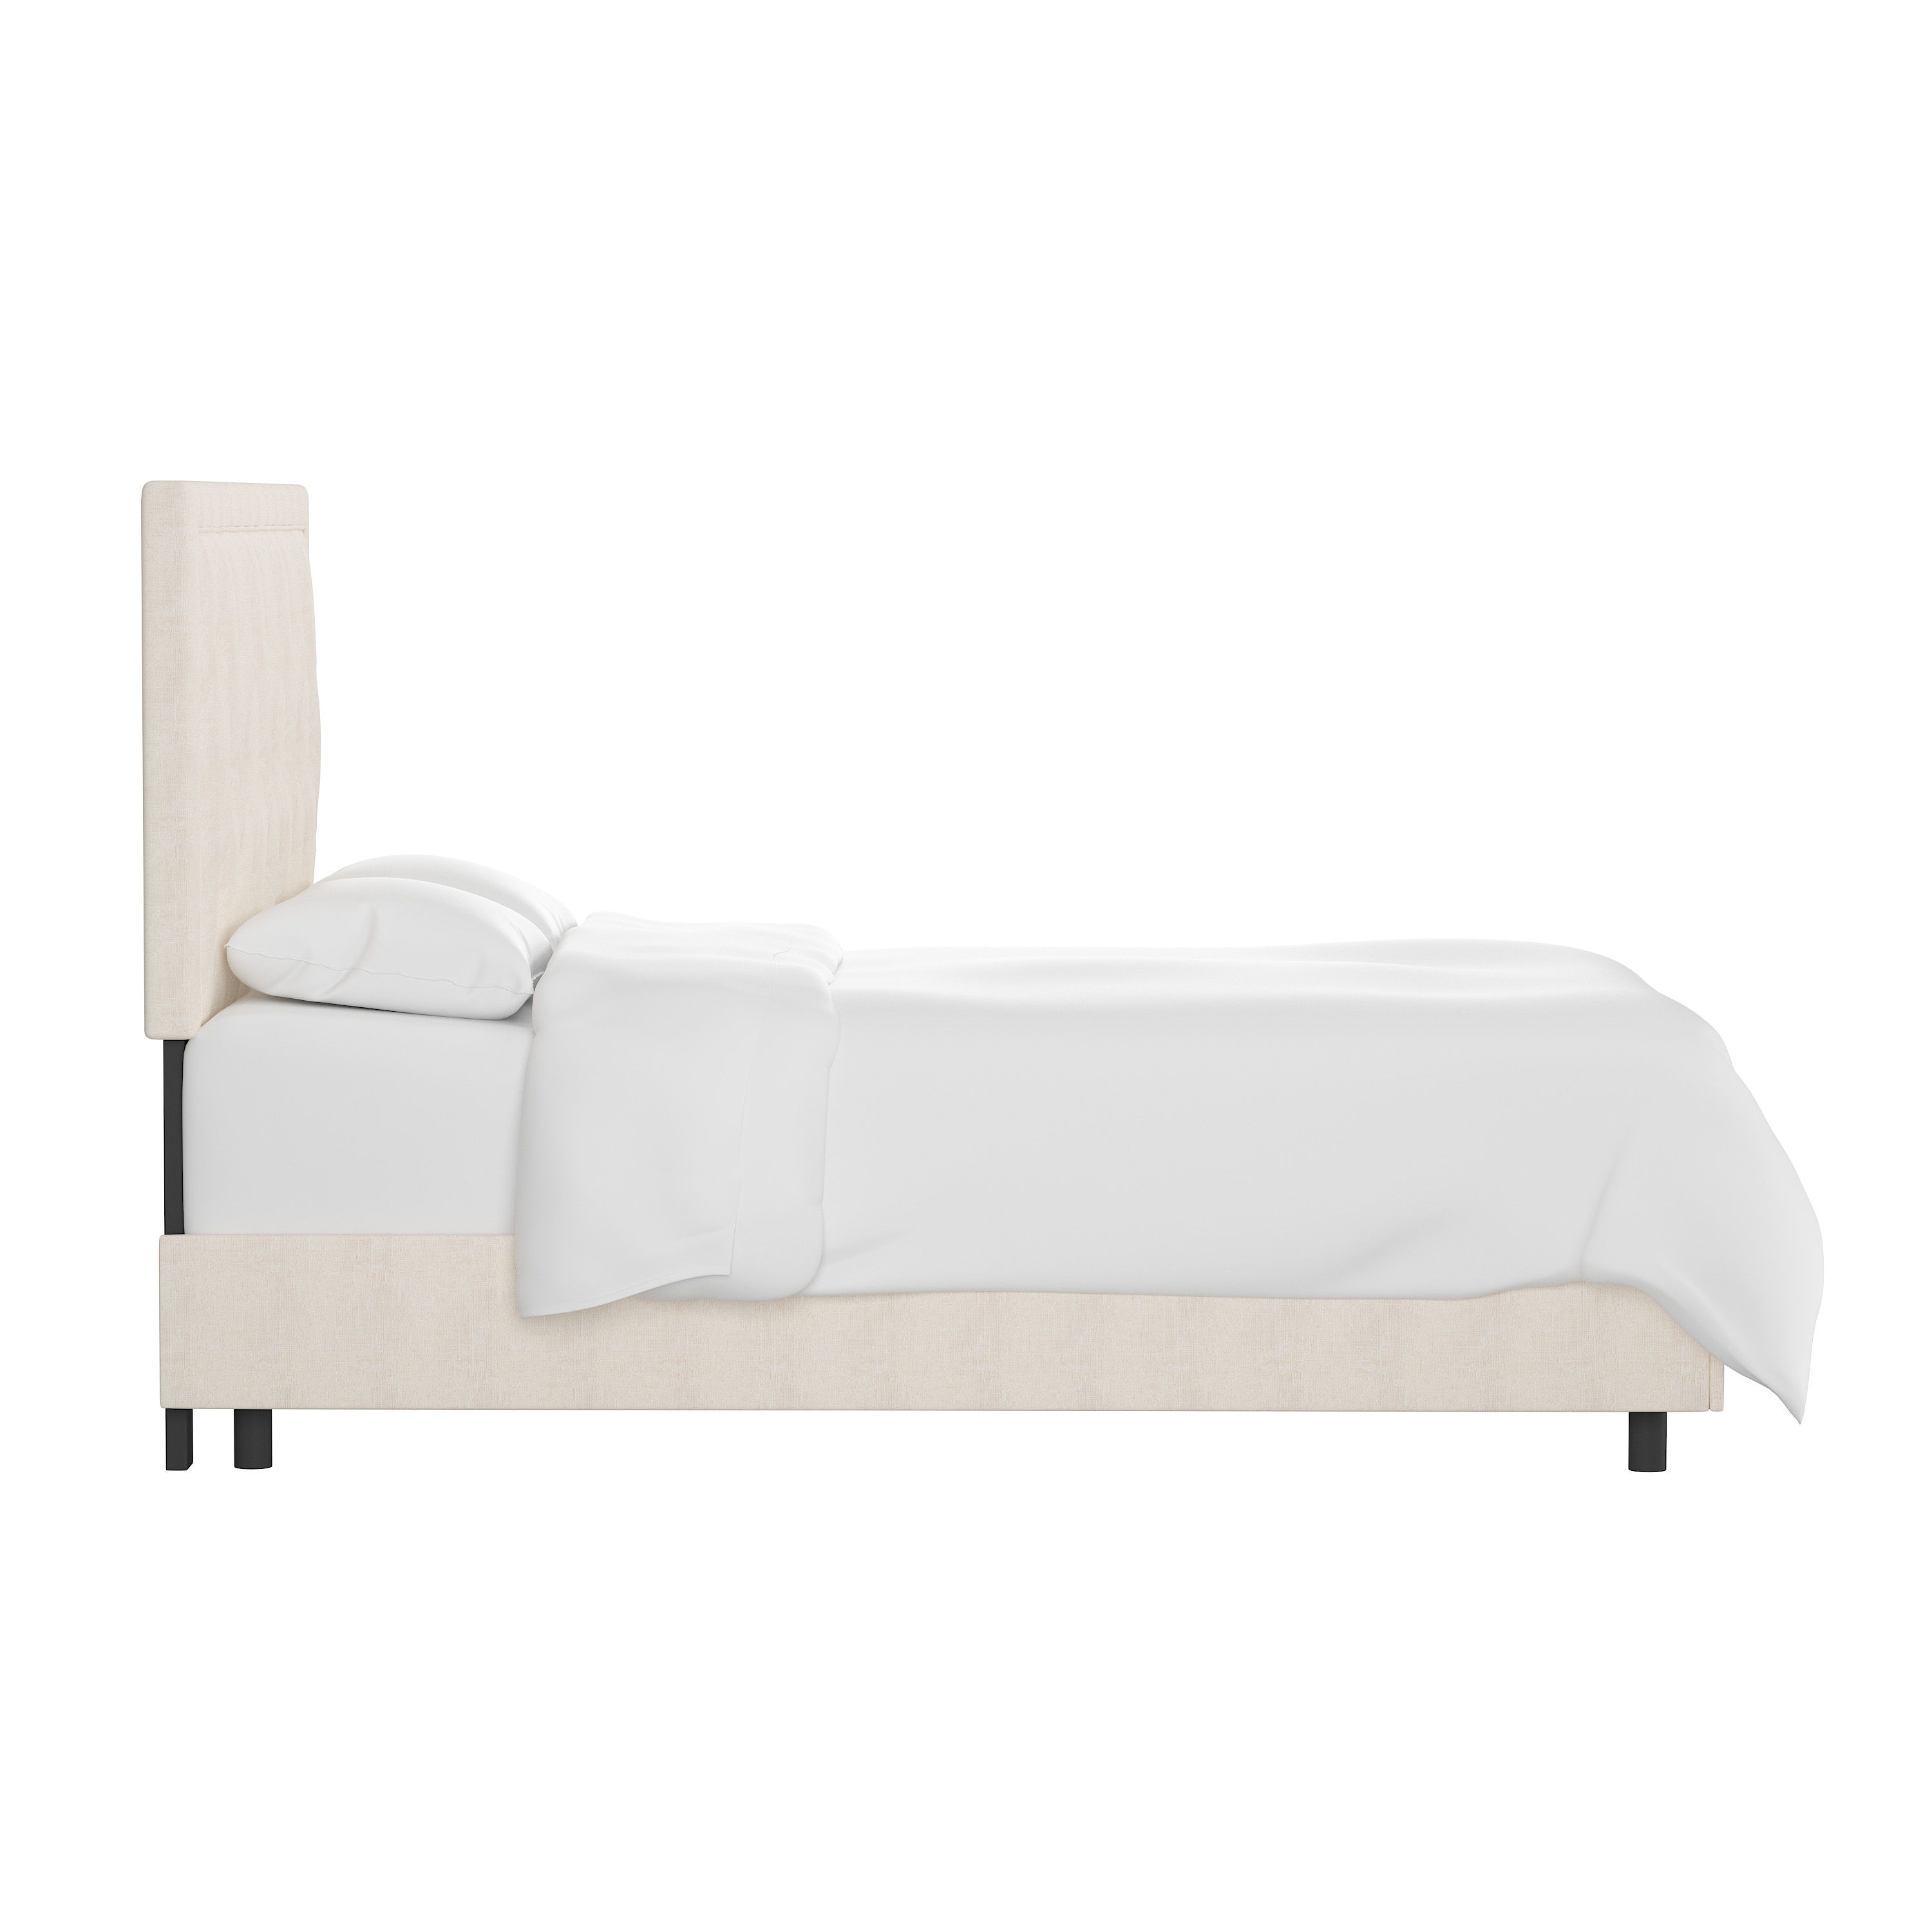 Lafayette Bed, Twin, White - Image 2